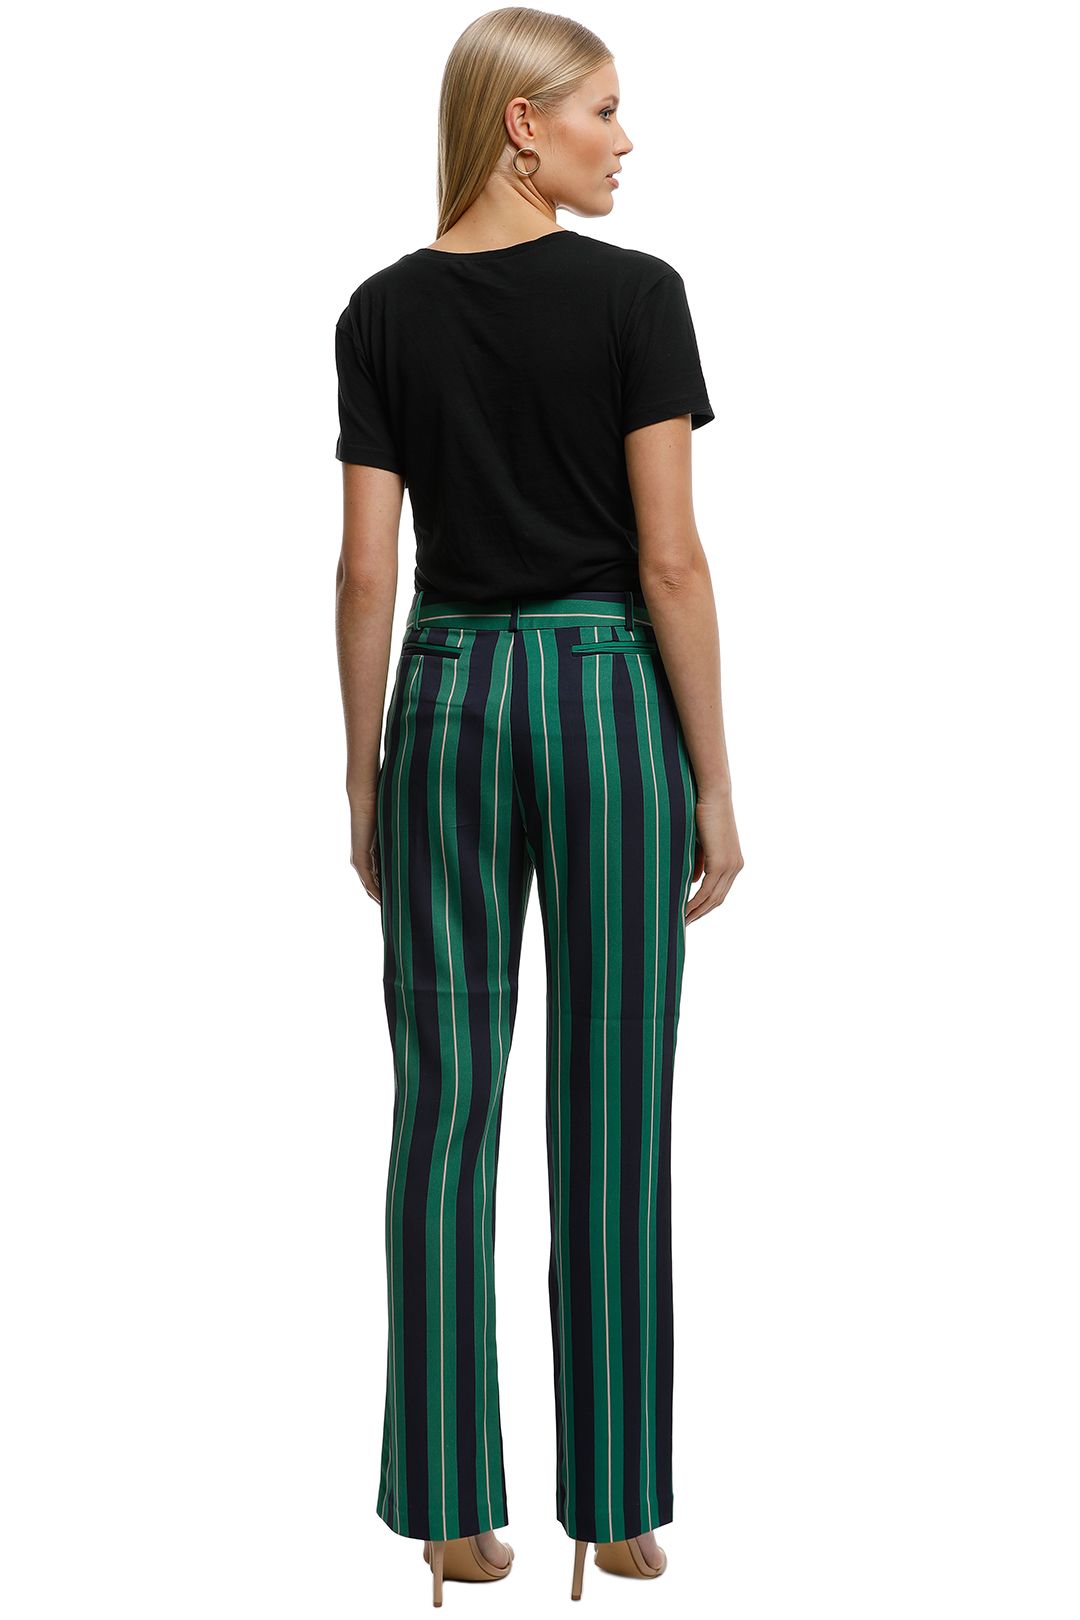 Moss-and-Spy-Gatsby-Pant-Green-Stripe-Back